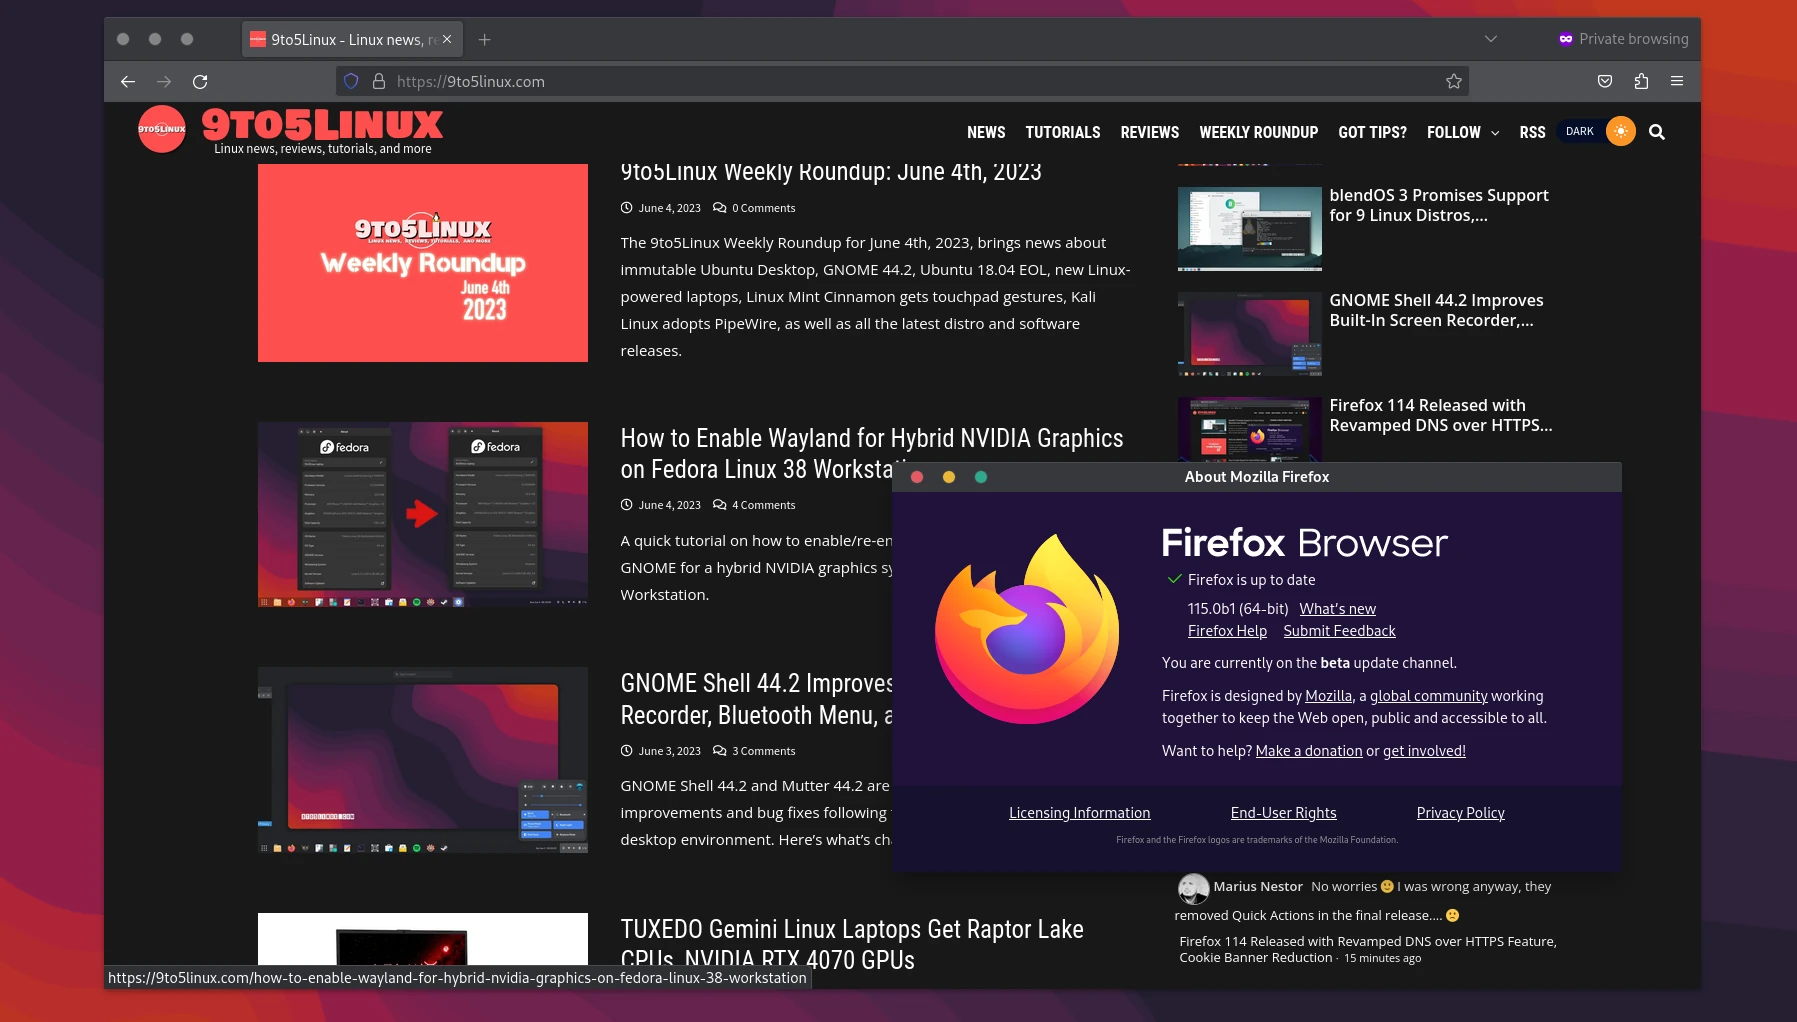 Firefox 115 Beta Brings Cookie Banner Reduction, Quick Actions in Address Bar